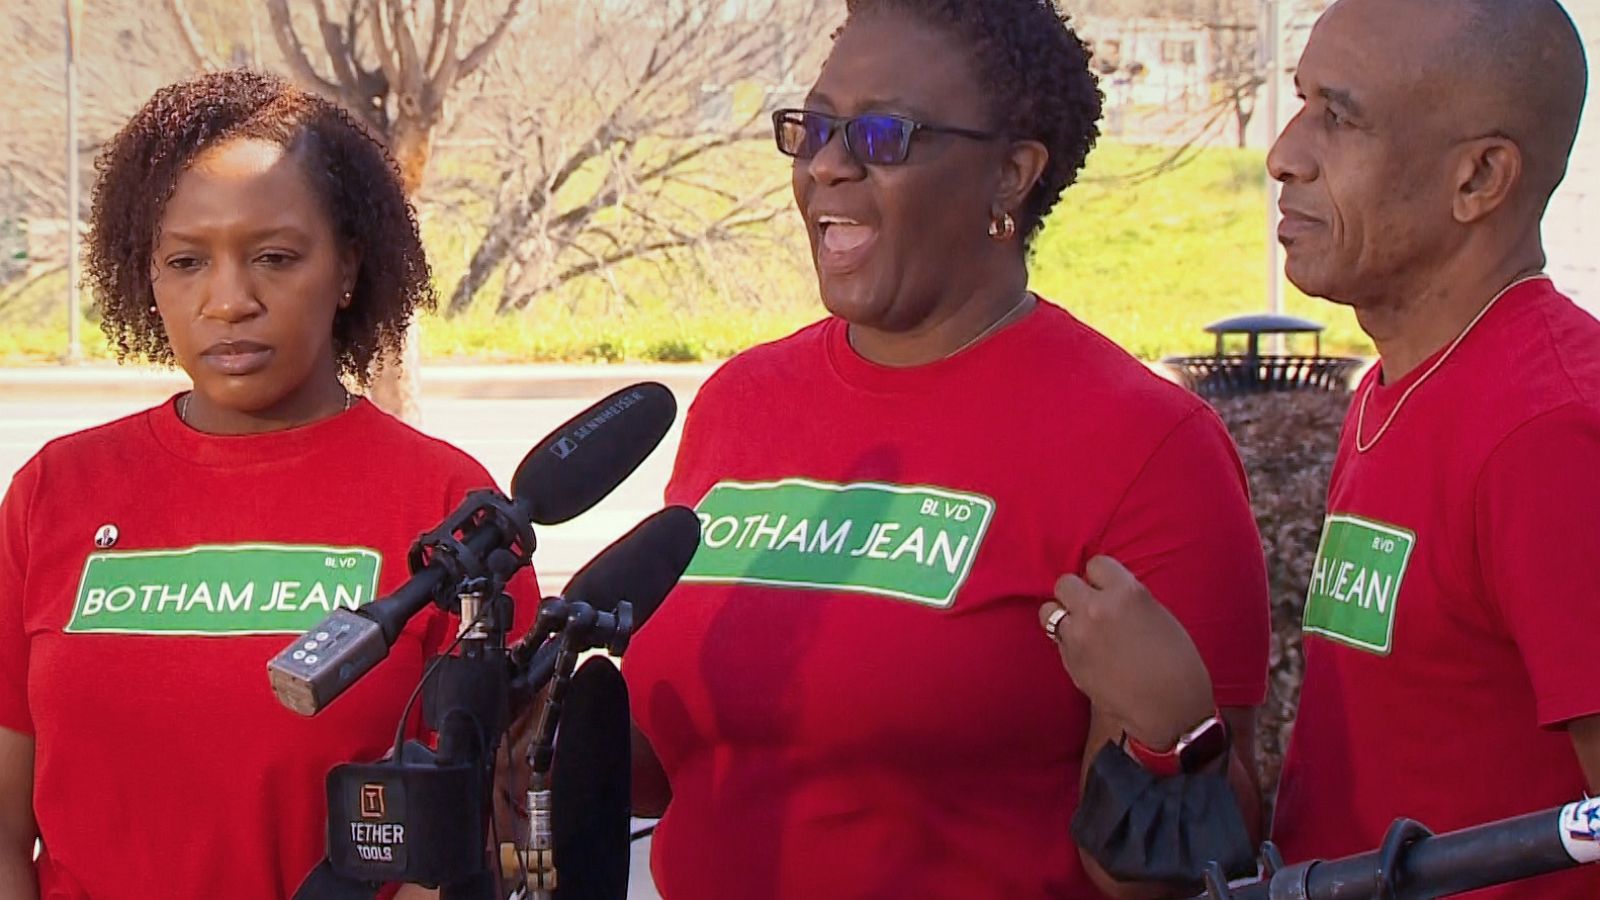 PHOTO: Botham Jean's mother, Allison Jean, speaks at a press conference about the renaming of a street in her son's honor in Dallas, March 26, 2021.